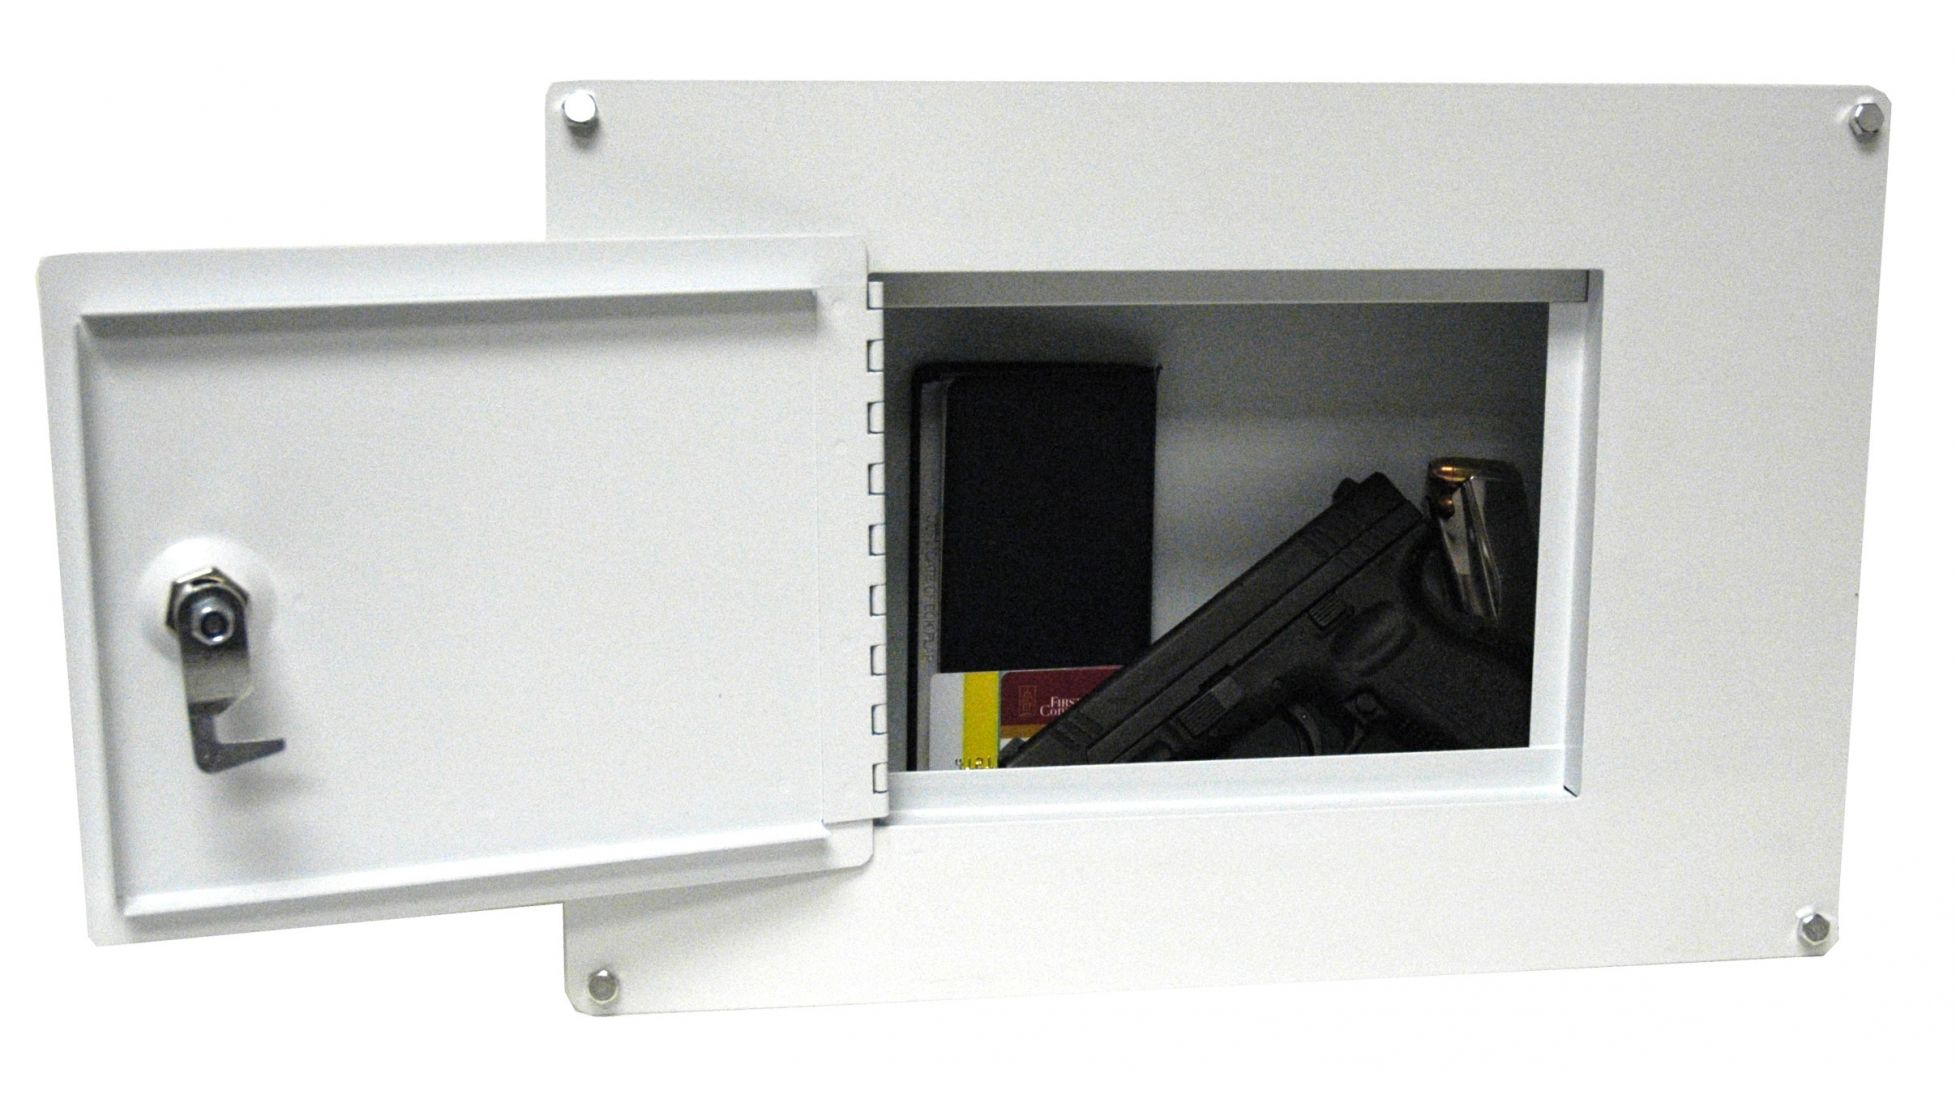 stack on in wall gun safe